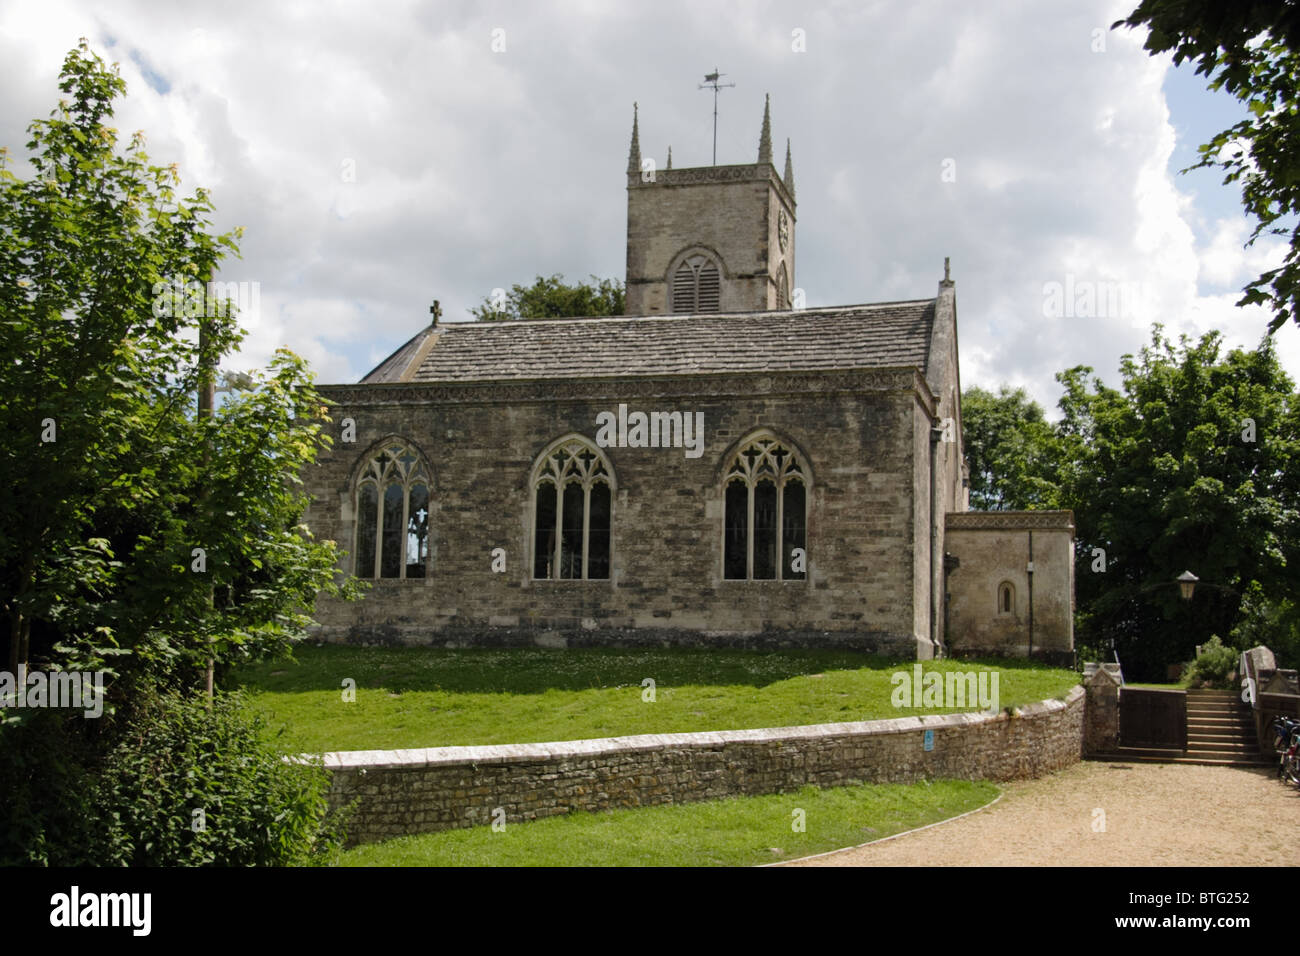 St Nicholas Church in Moreton Dorset famous for its Whistler etchings Stock Photo